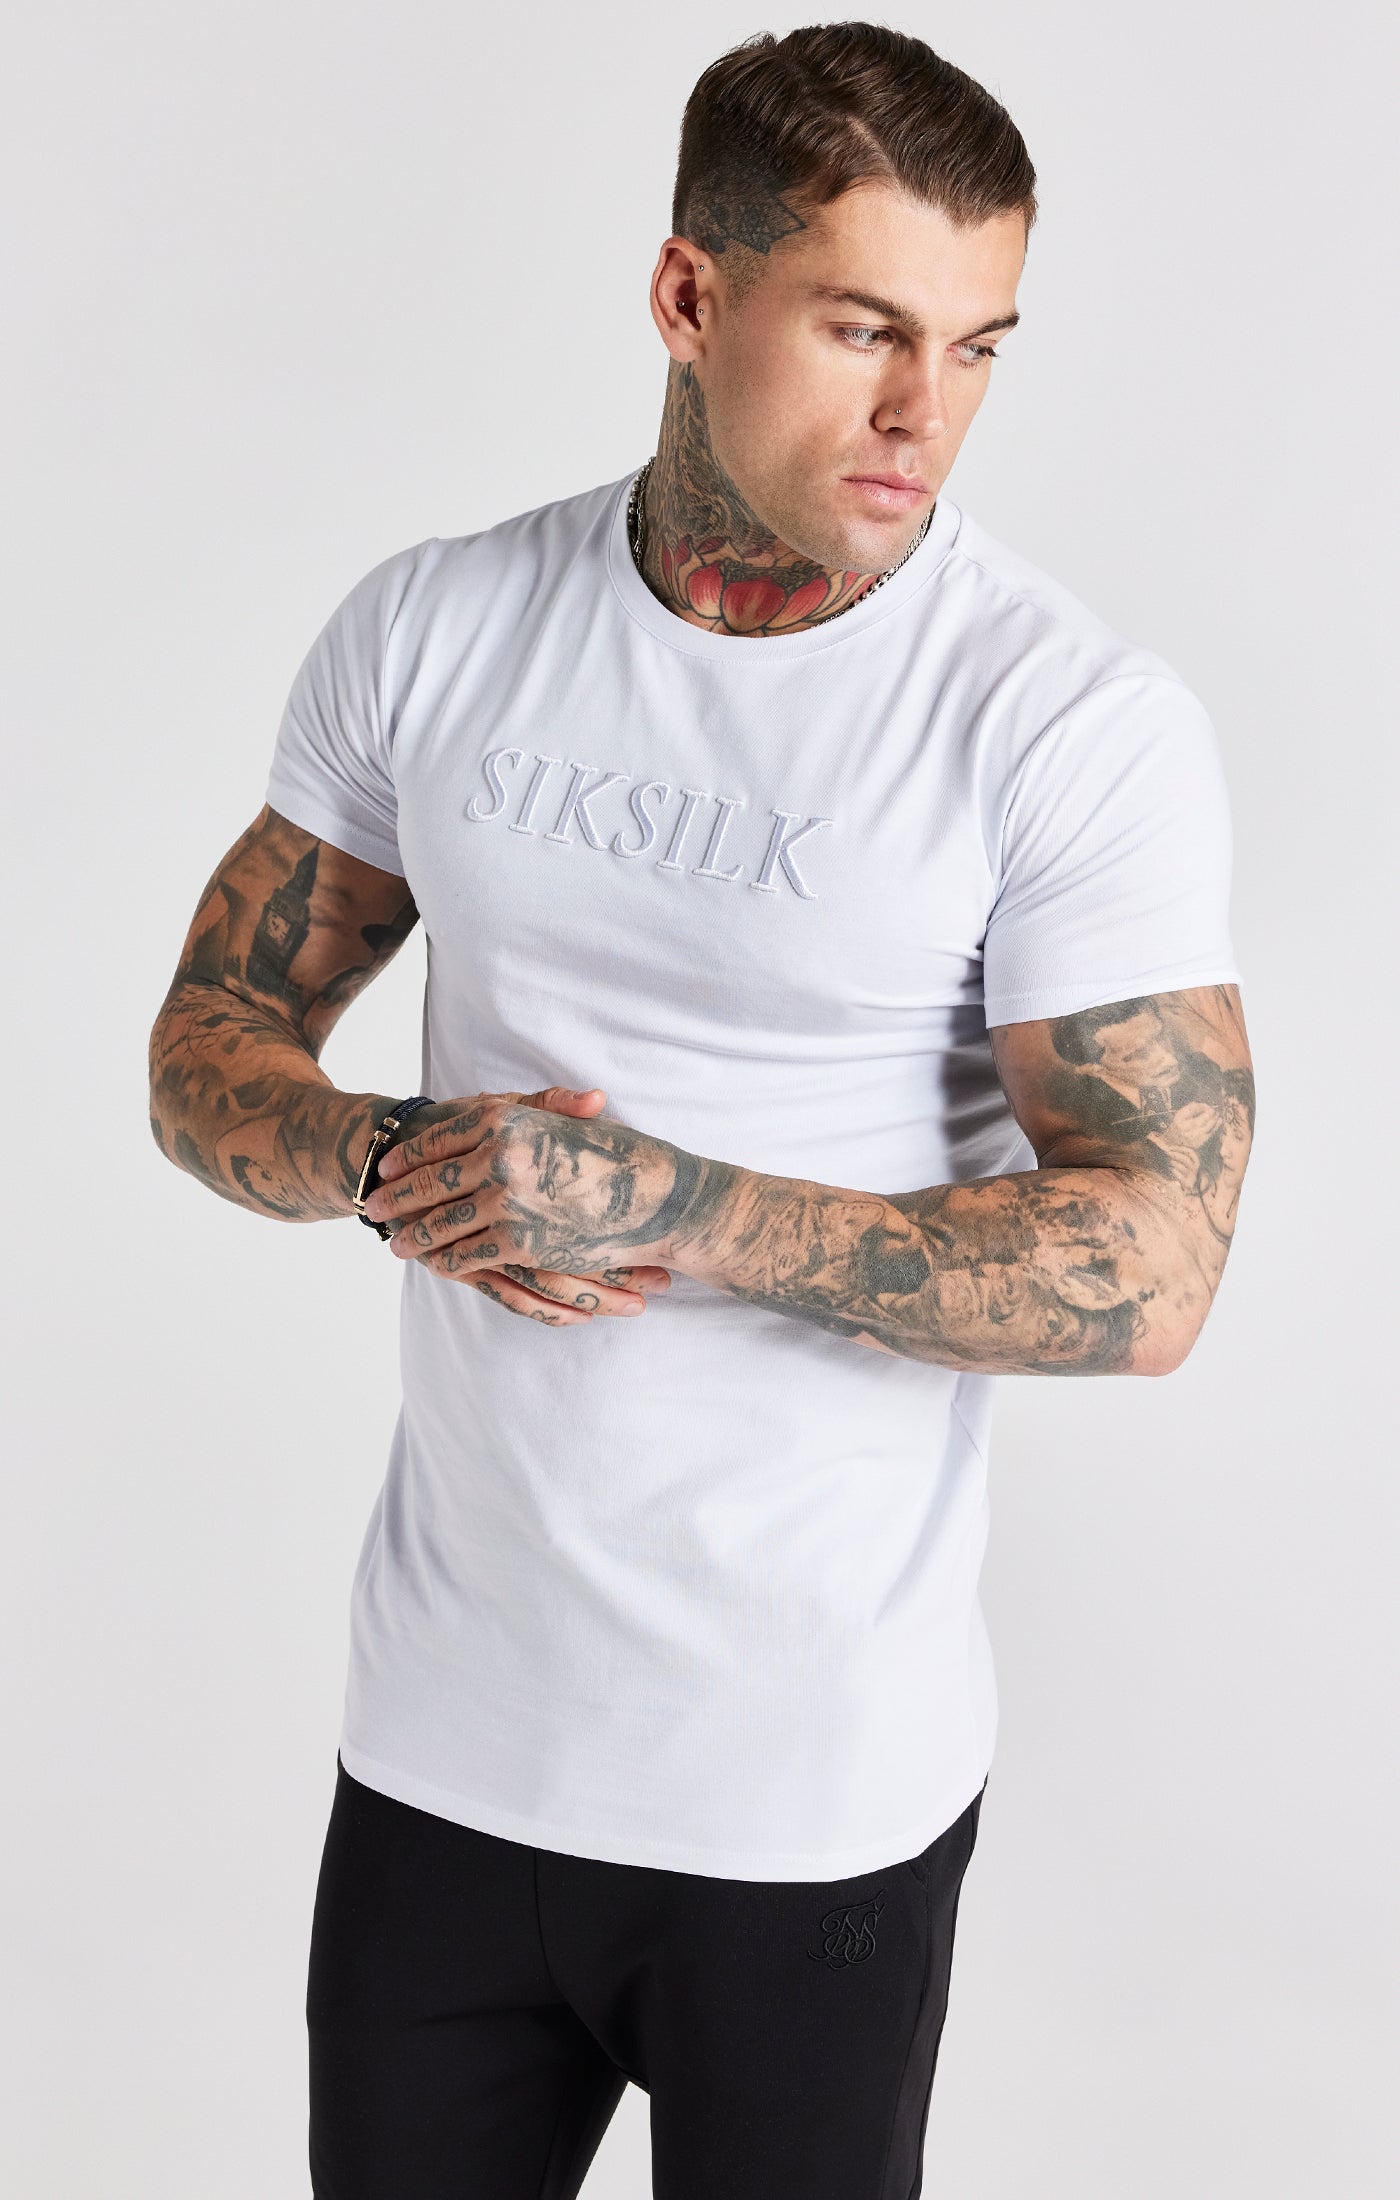 Embroidered Muscle Fit T-Shirt in White T-Shirts SikSilk   